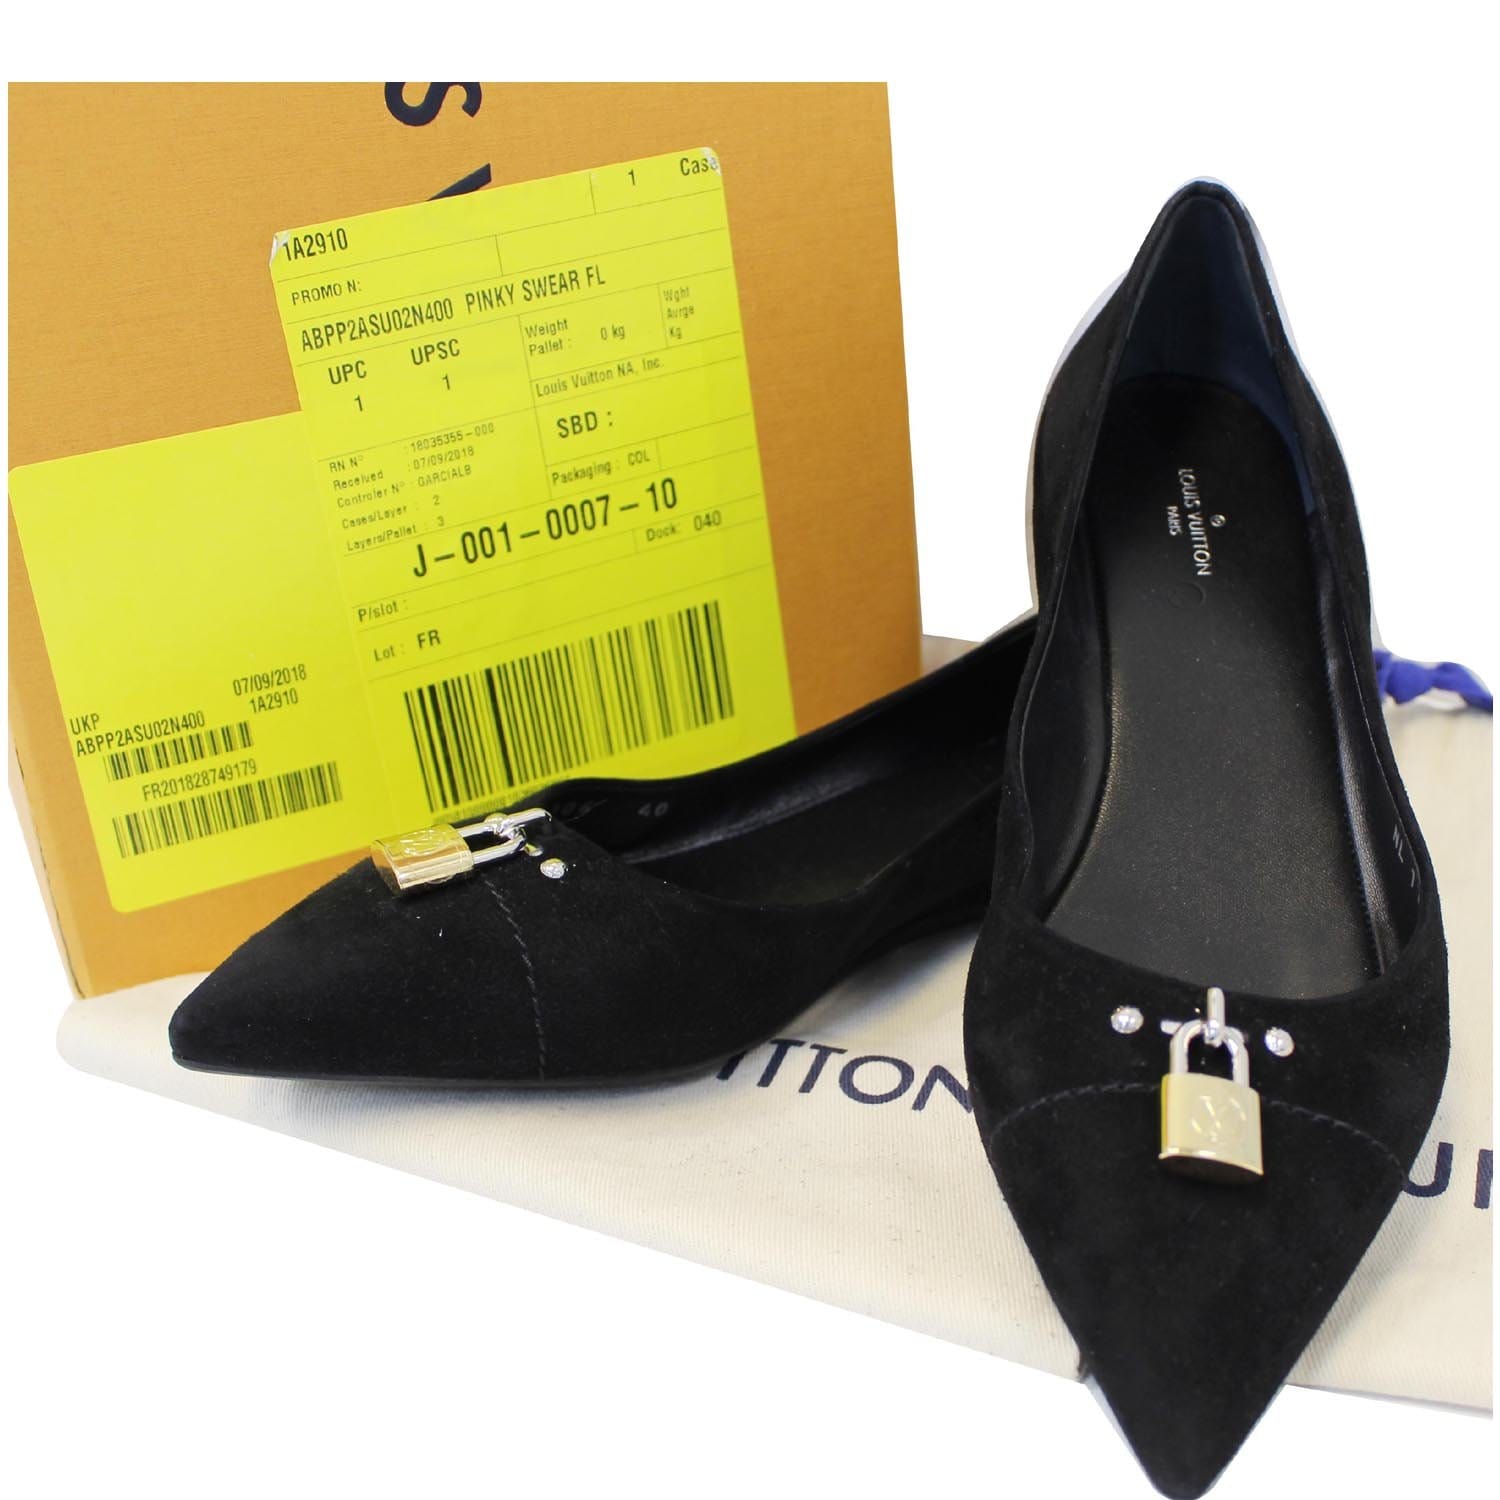 Louis Vuitton Leather Flats In Black